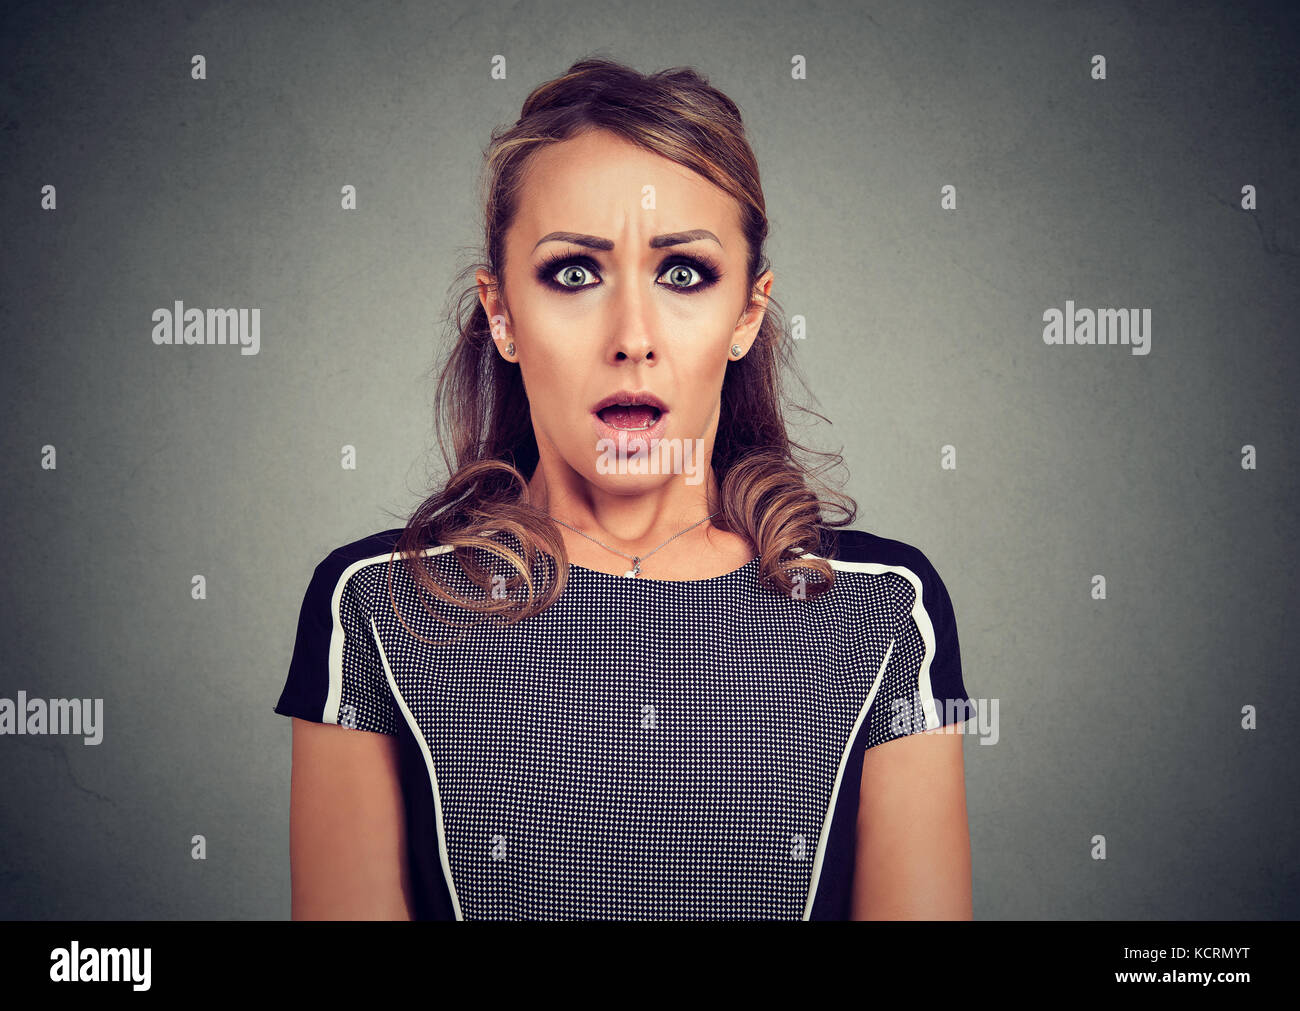 Scared shocked woman isolated on gray background Stock Photo